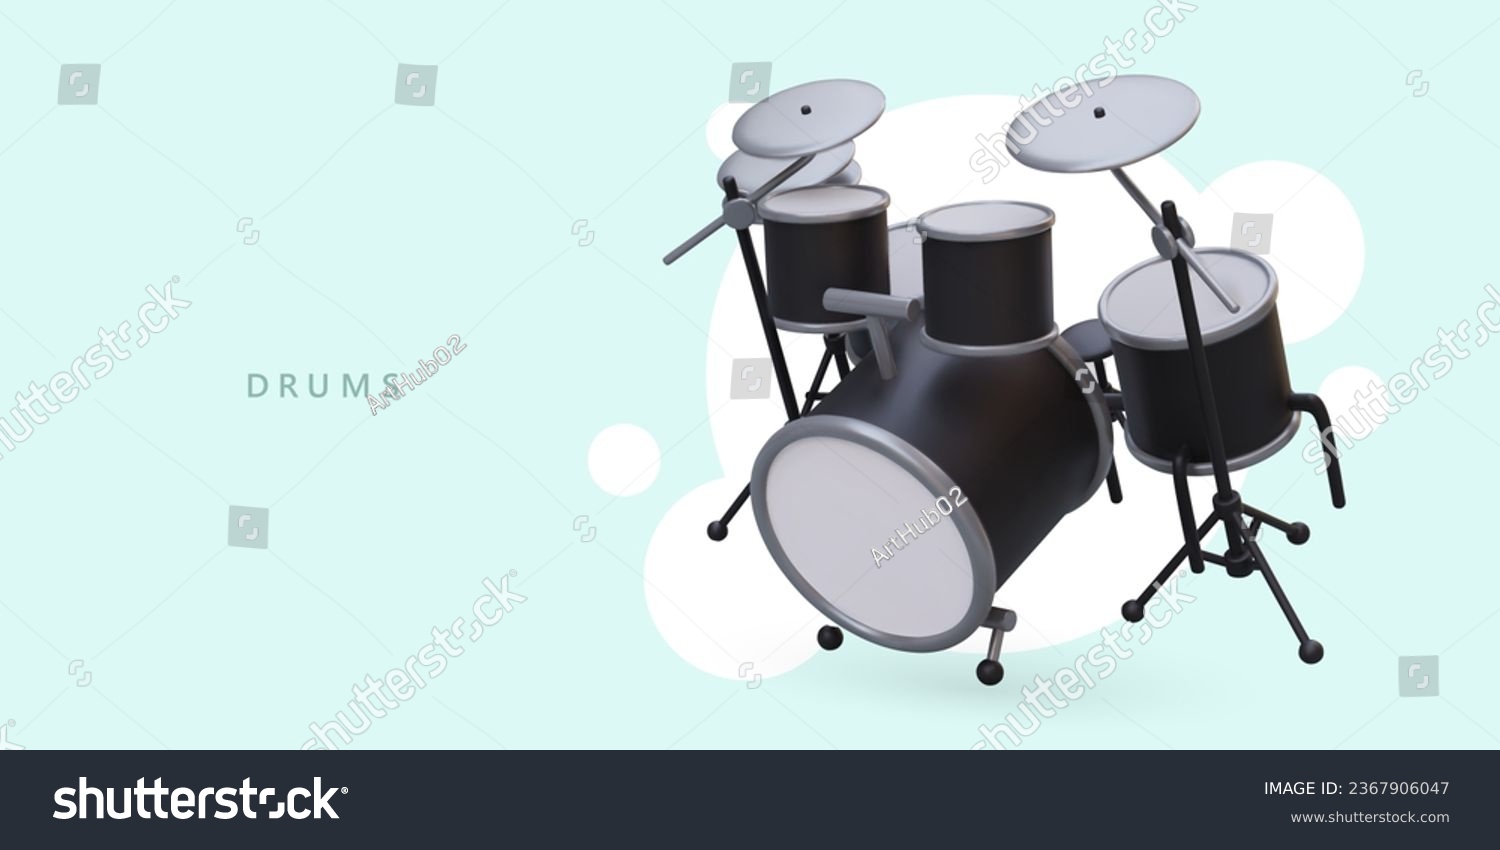 SVG of Advertising poster for musical instrument shop with 3d realistic drum set. Concept of hobby and creating music. Vector illustration with blue background svg